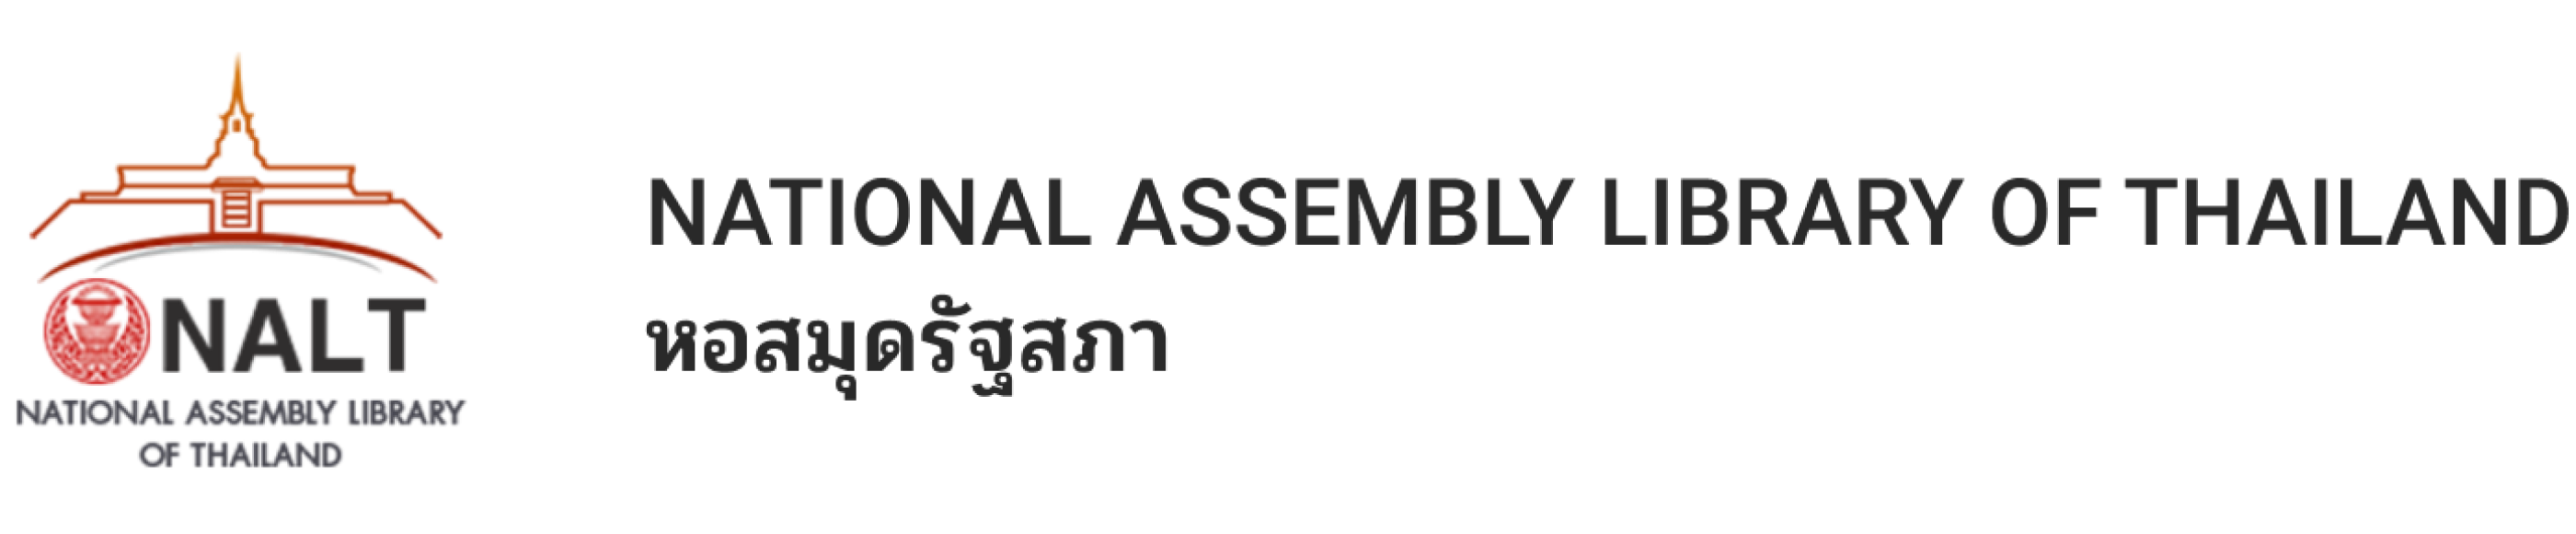 National Assembly Library of Thailand